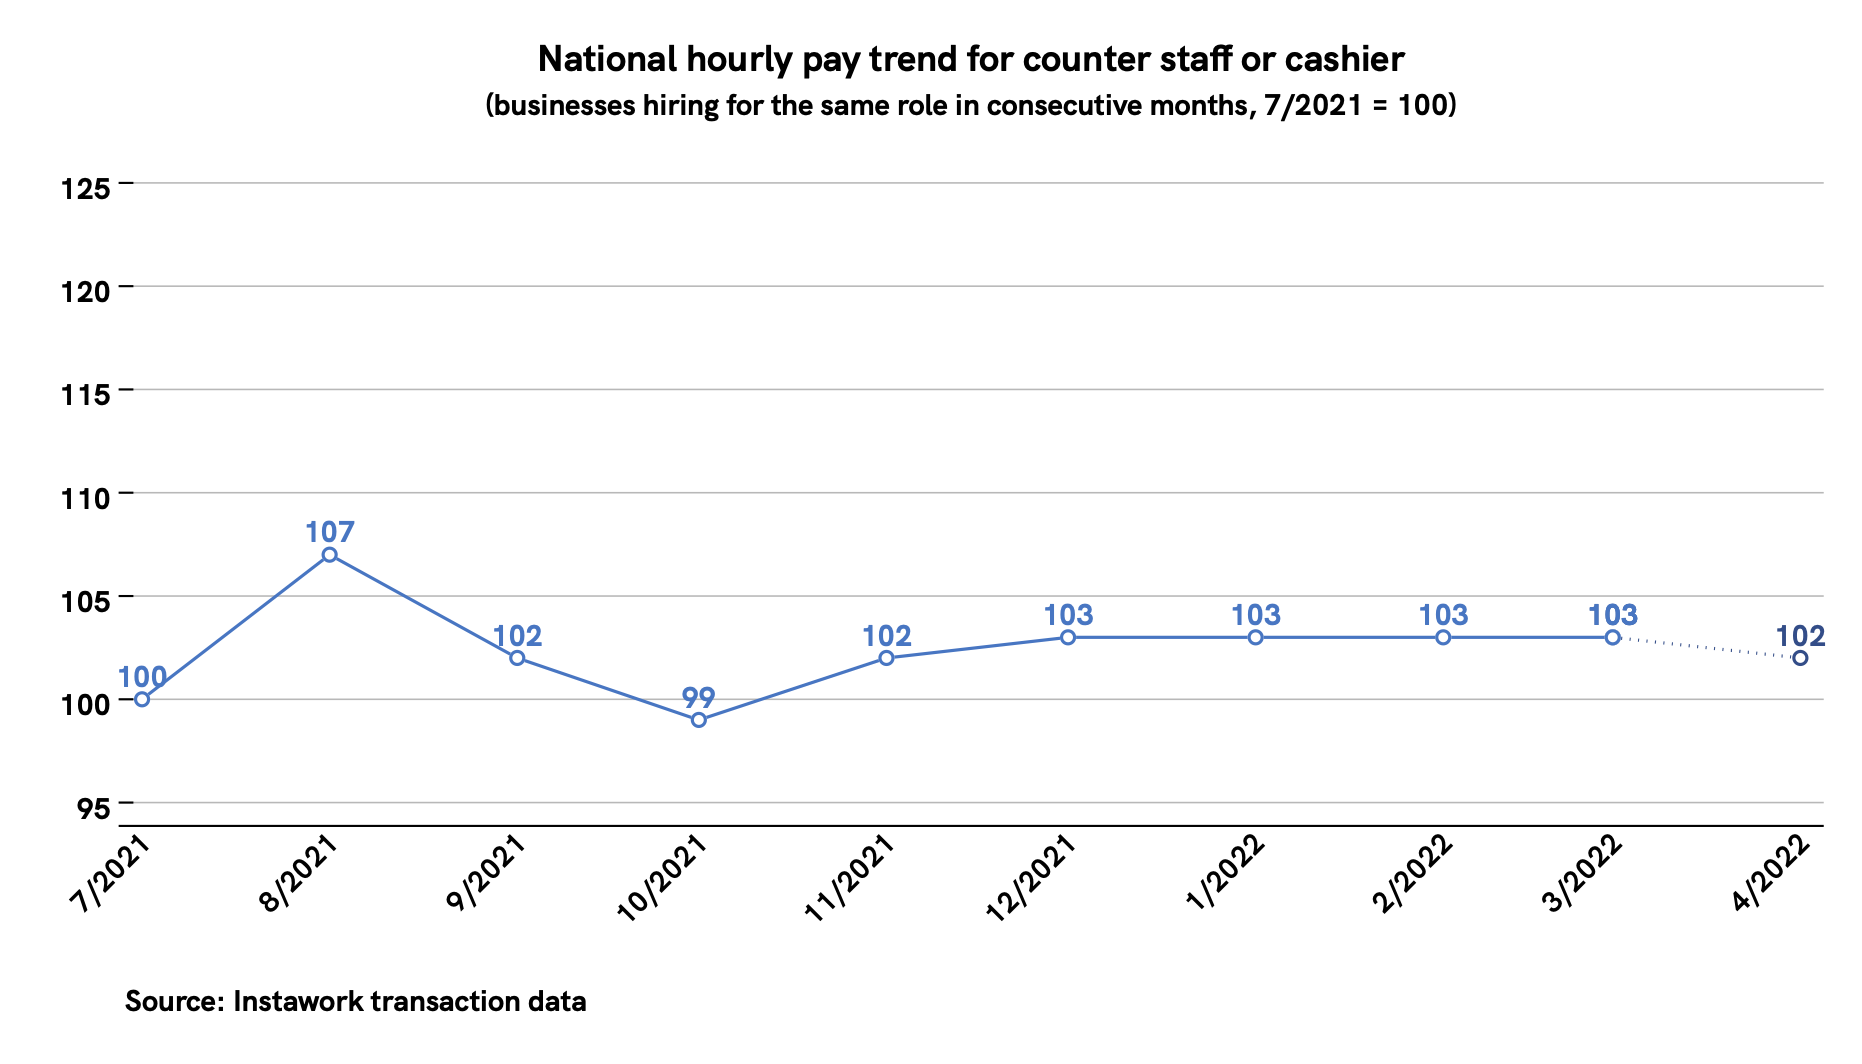 28 Mar 2022 pay trend for counter staff or cashier